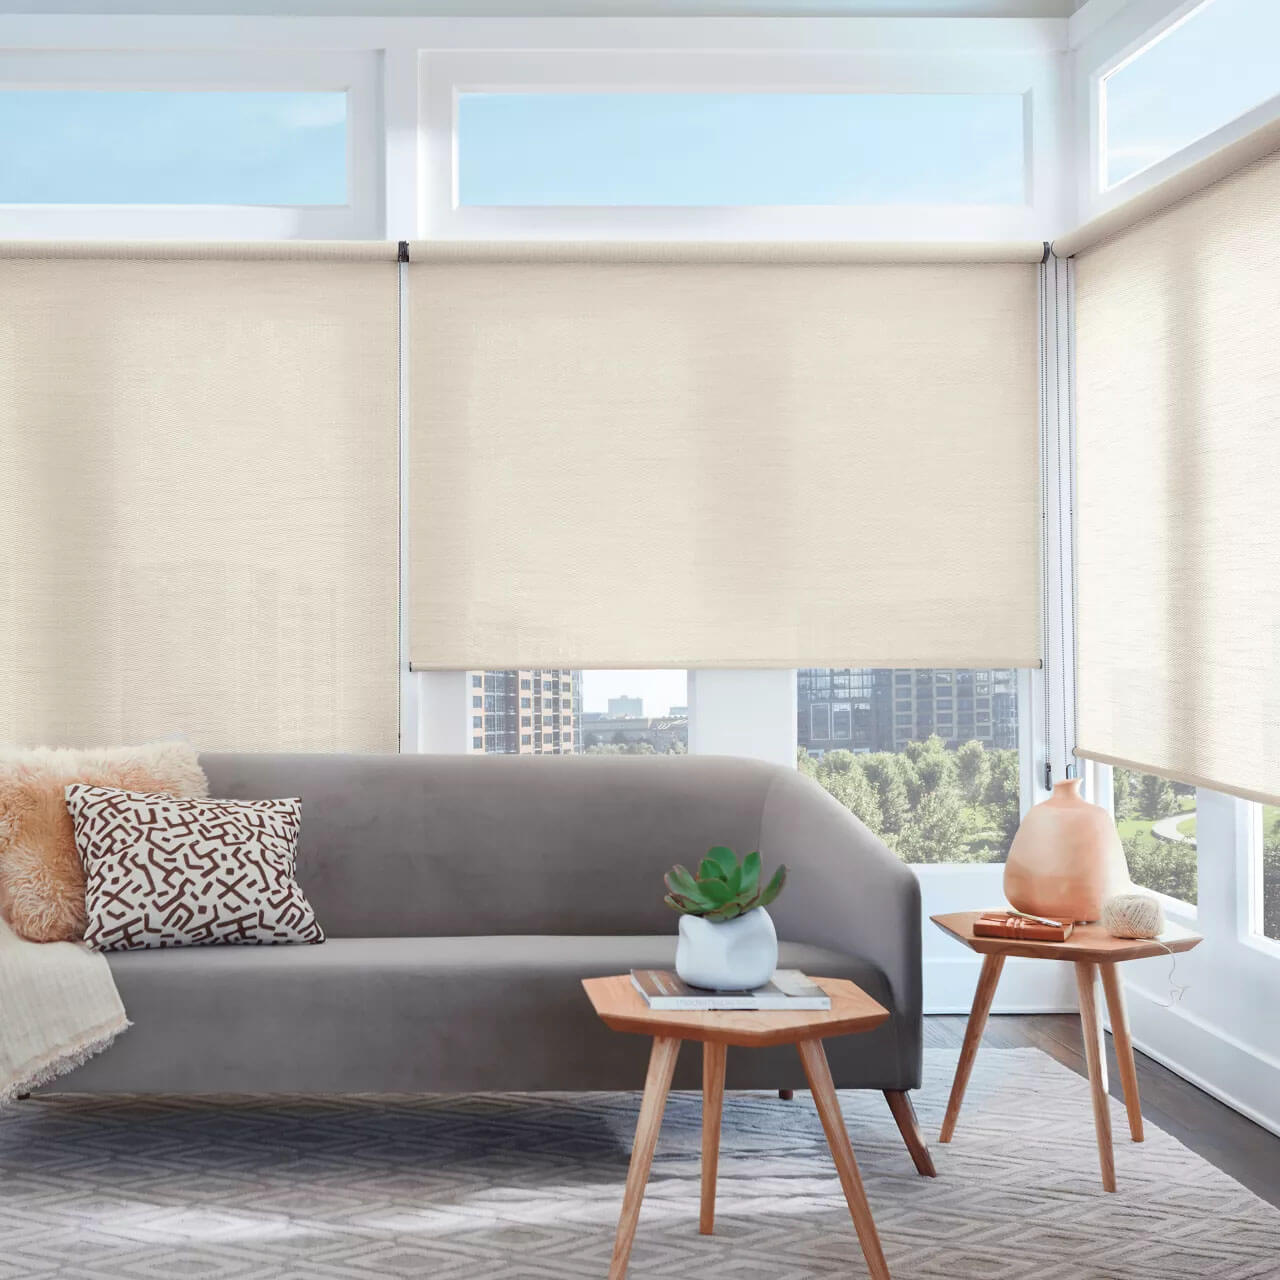 Window covering in living room | The L&L Company